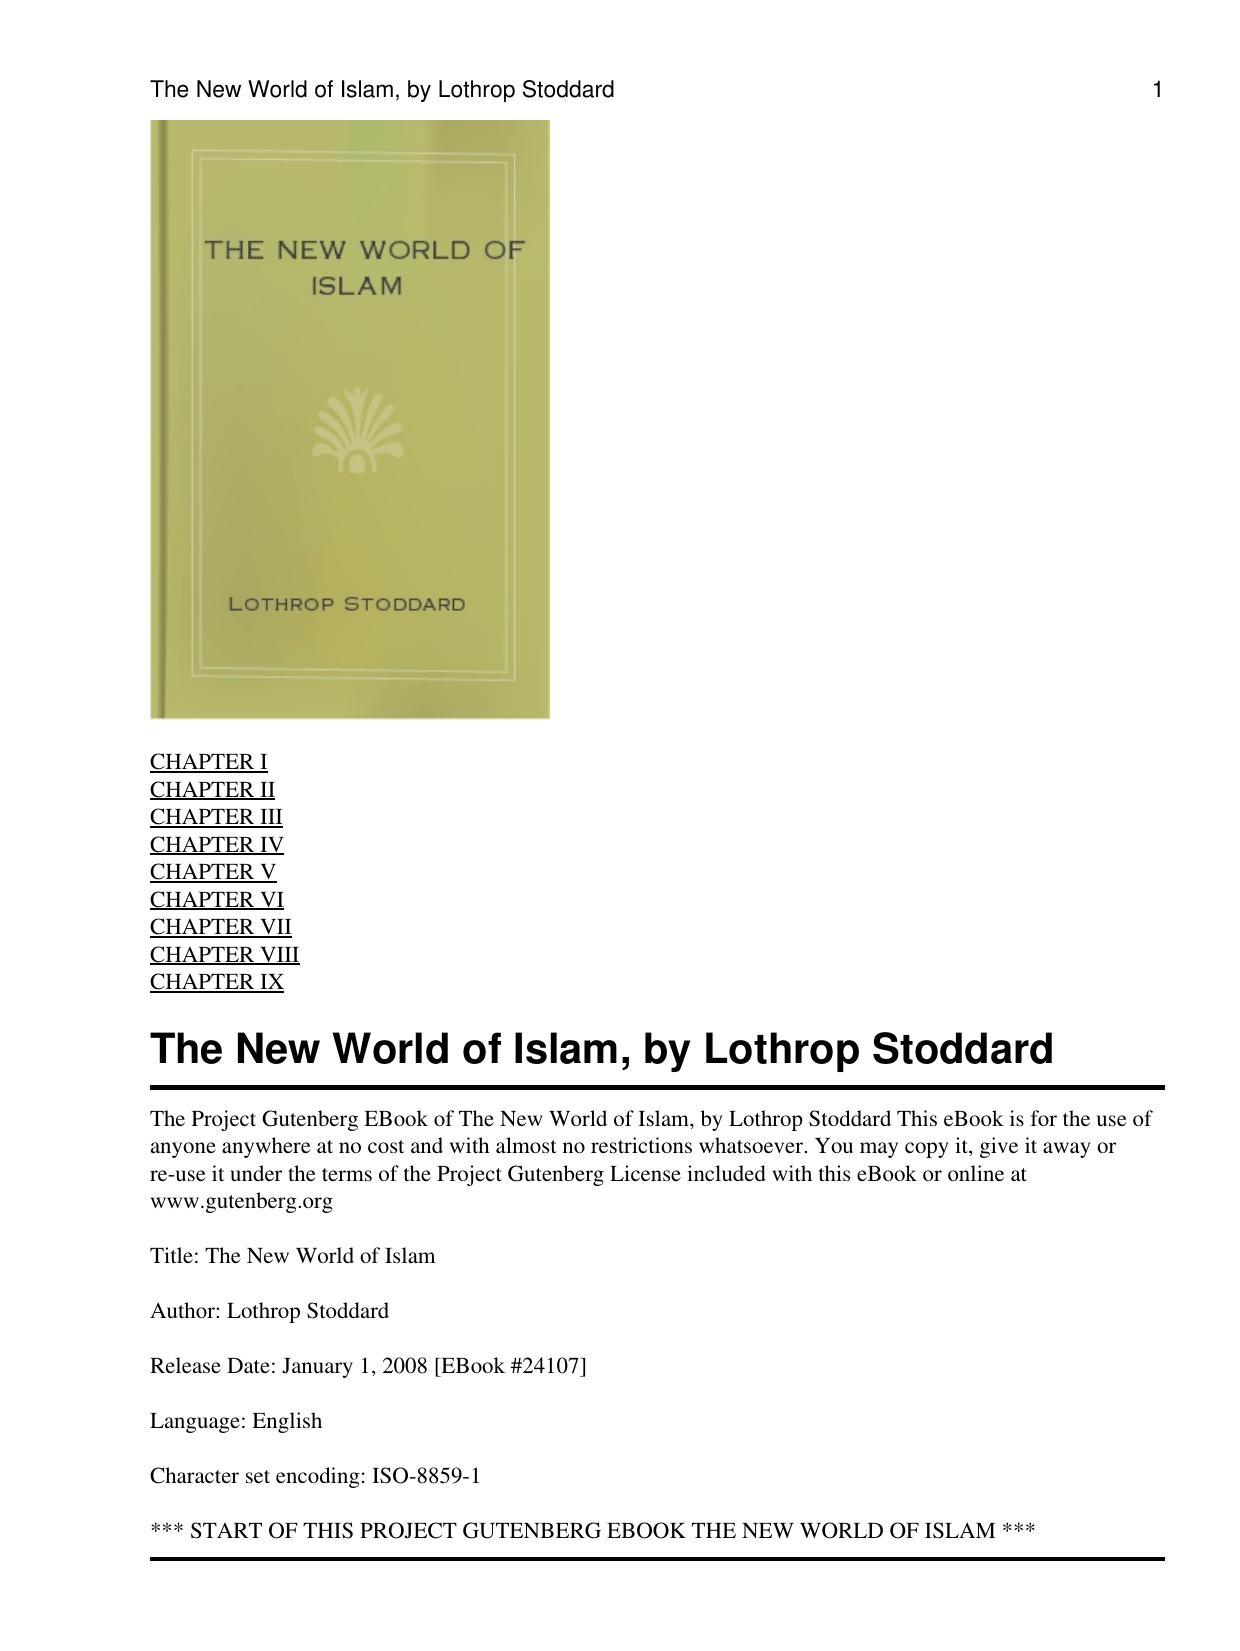 The New World of Islam by Lothrop Stoddard